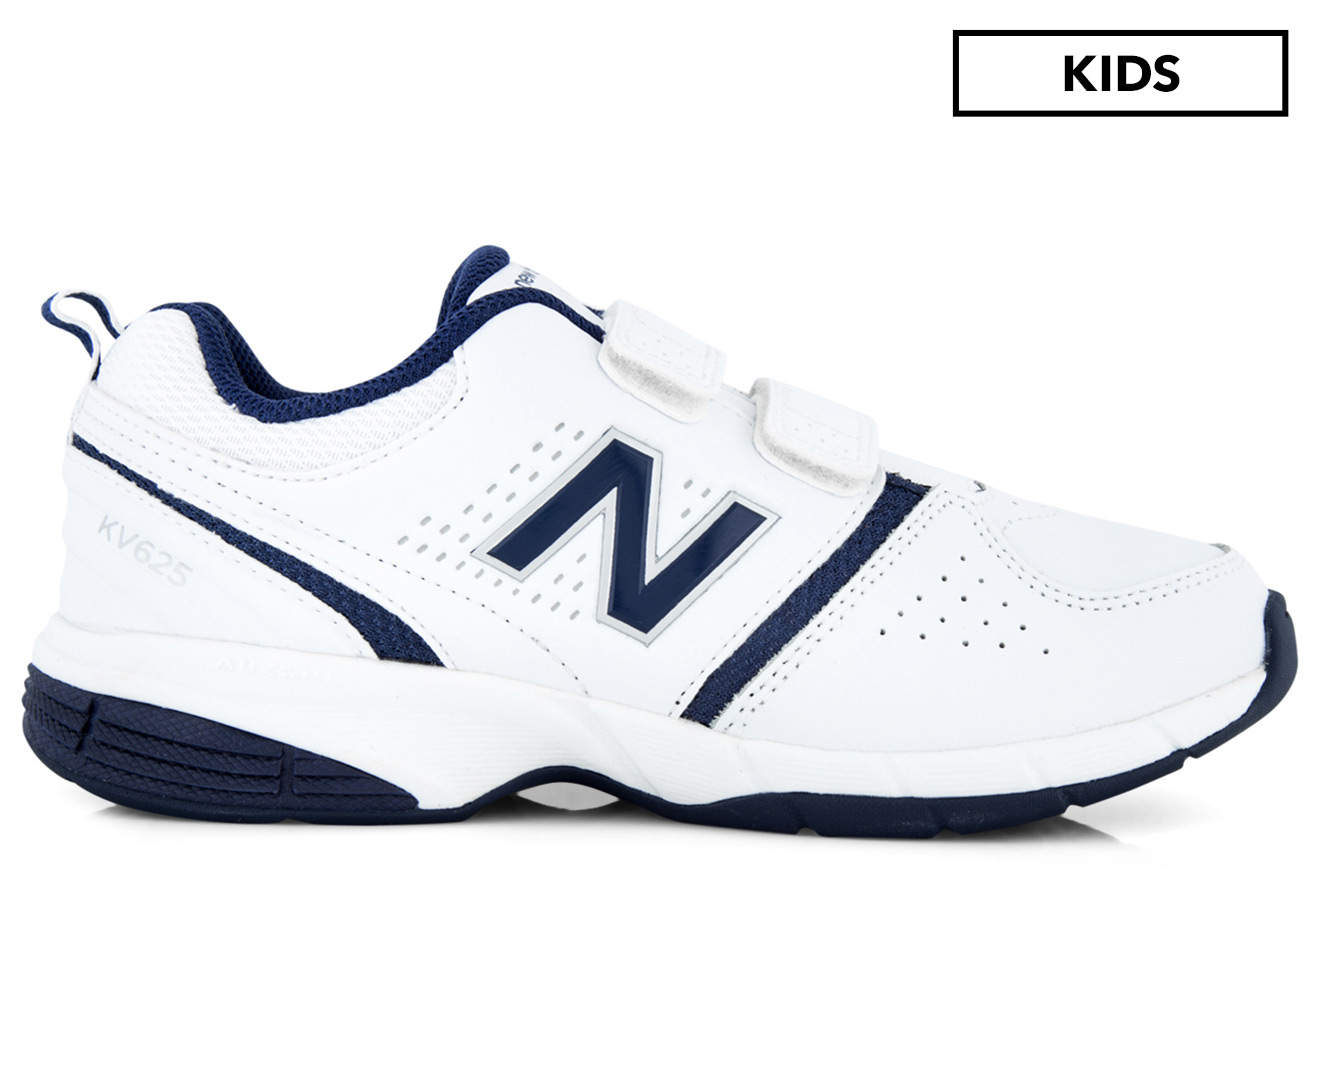 Iluminar Impermeable sin cable New Balance Boys' Pre-School 625 Hook-And-Loop Wide Fit Shoe - White/Navy |  Catch.com.au